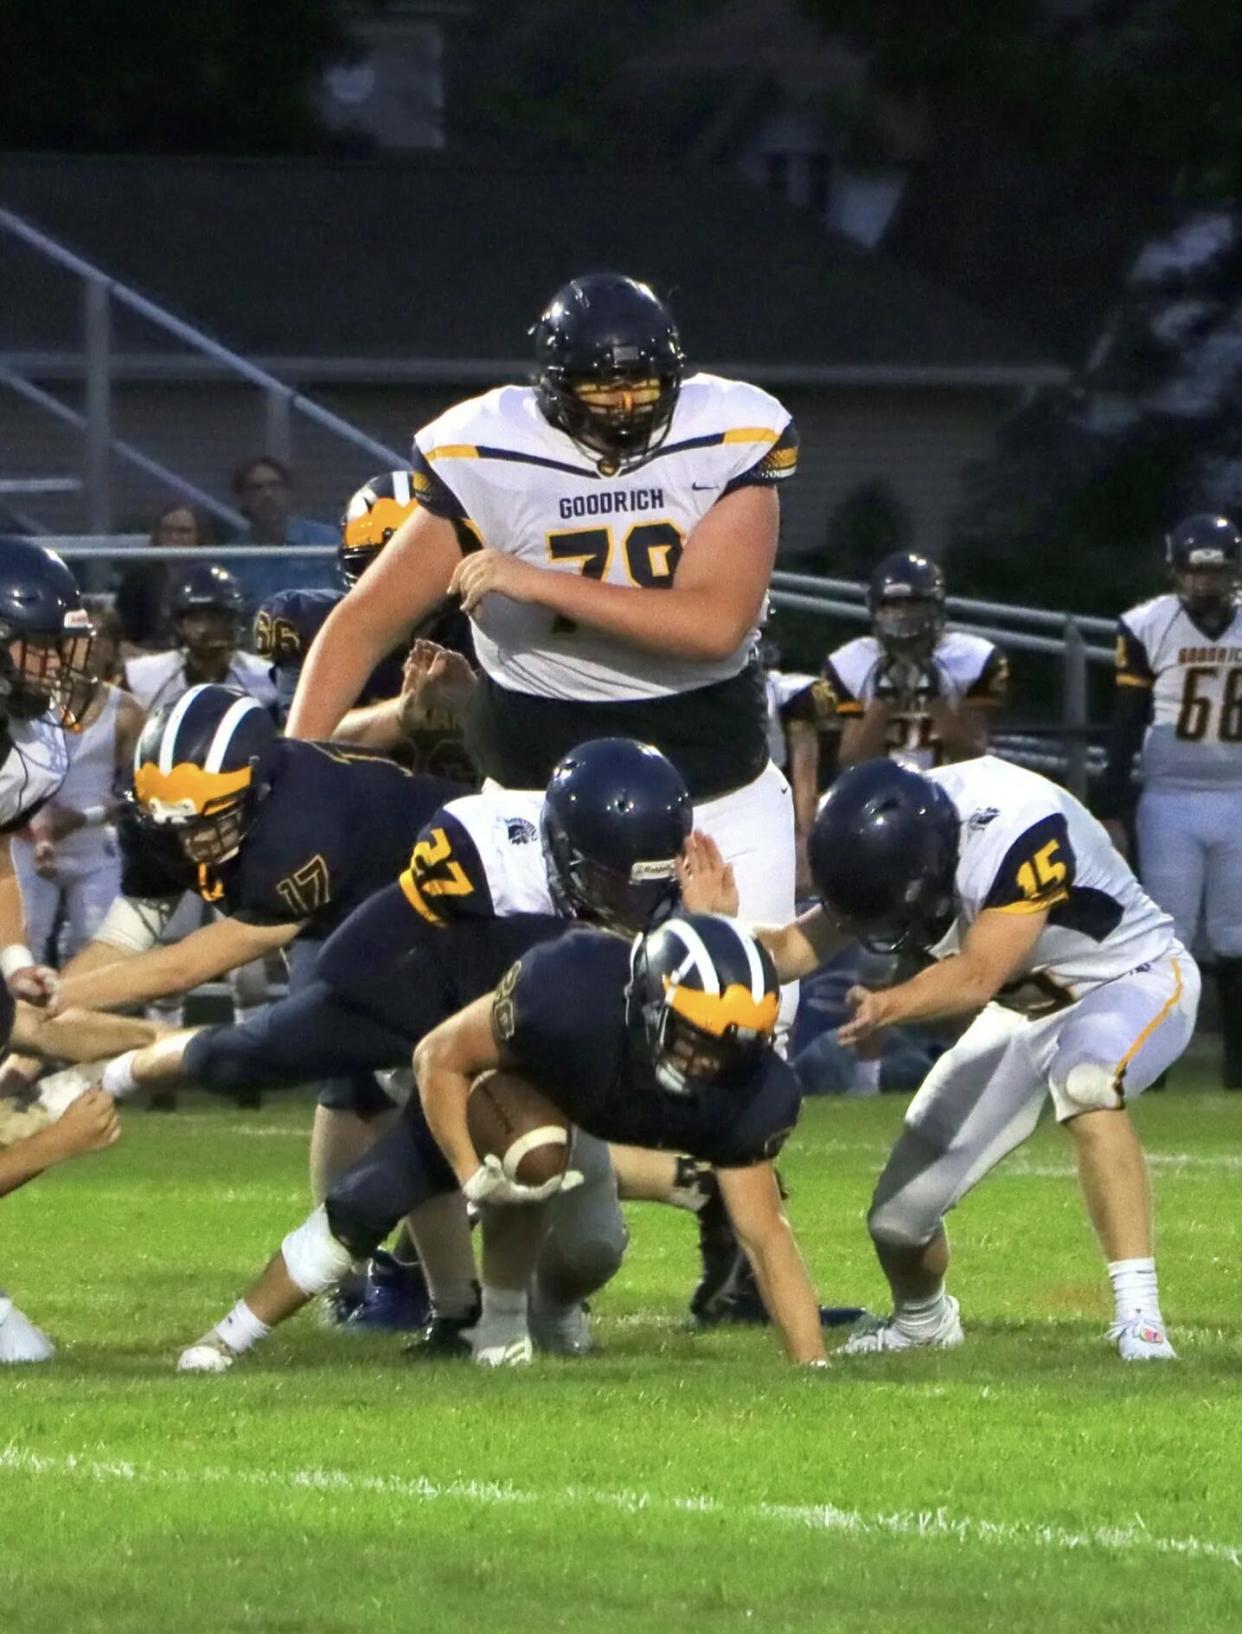 Eric Kilburn, 14, plays on the Goodrich High School junior-varsity football team. The defensive tackle sprained his ankle early in the season, likely due to a lack of cleats for his size 23 feet.